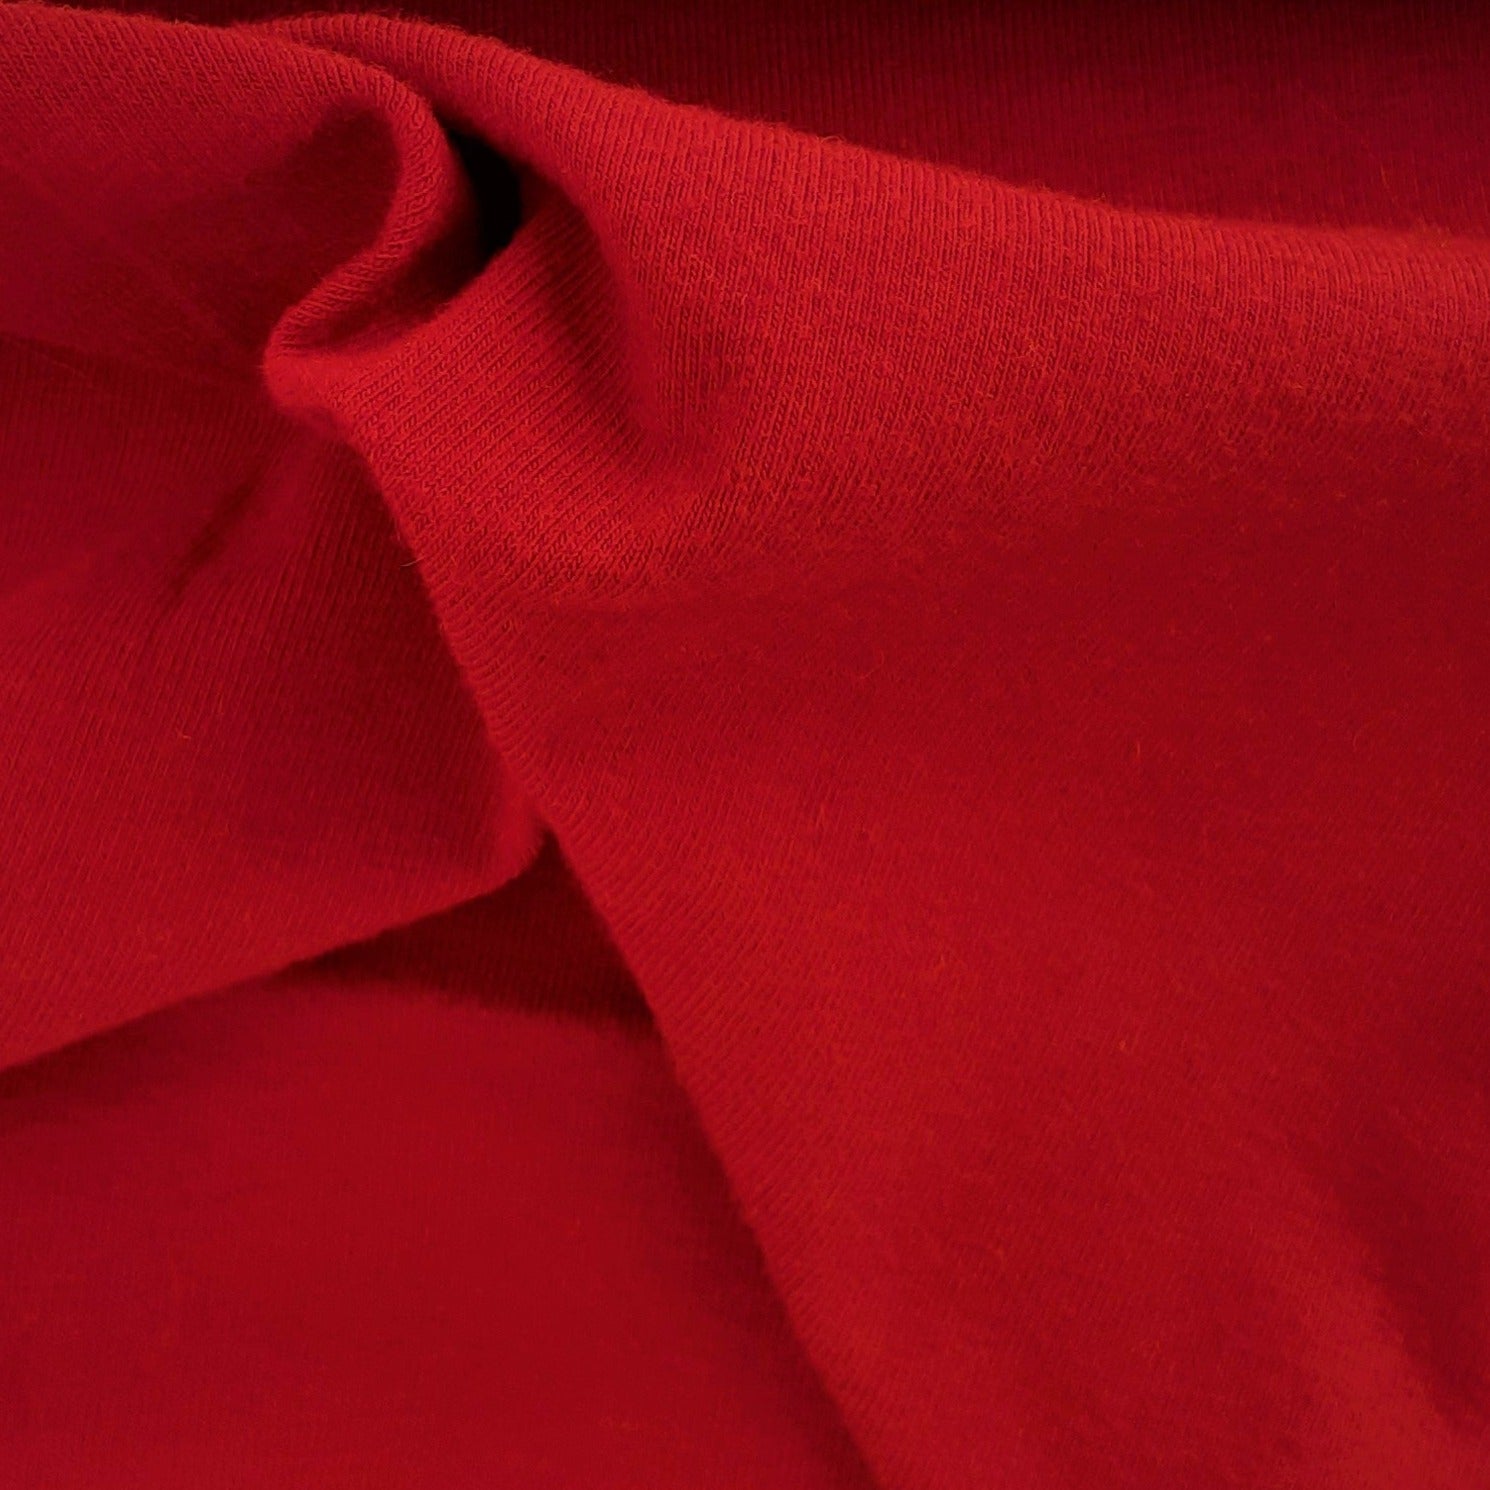 Red 10 Ounce Cotton/Spandex Jersey Knit Fabric - SKU 2853G 